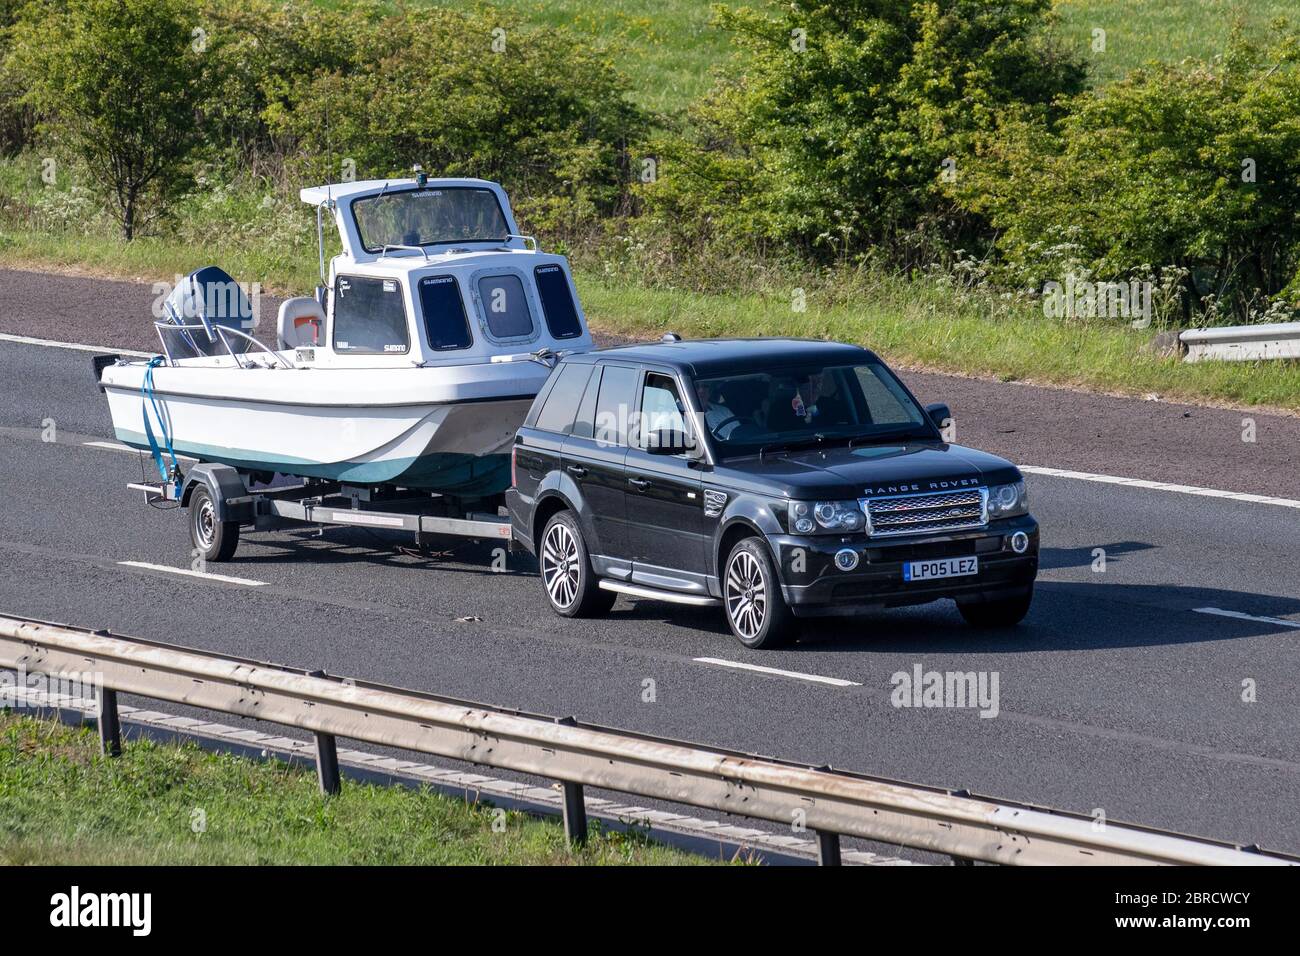 2007 black Land Rover Range Rover SP HSE TDV8 A towing boat trailer; Vehicular traffic moving vehicles, cars driving vehicle on UK roads, motors, motoring on the M6 motorway highway Stock Photo